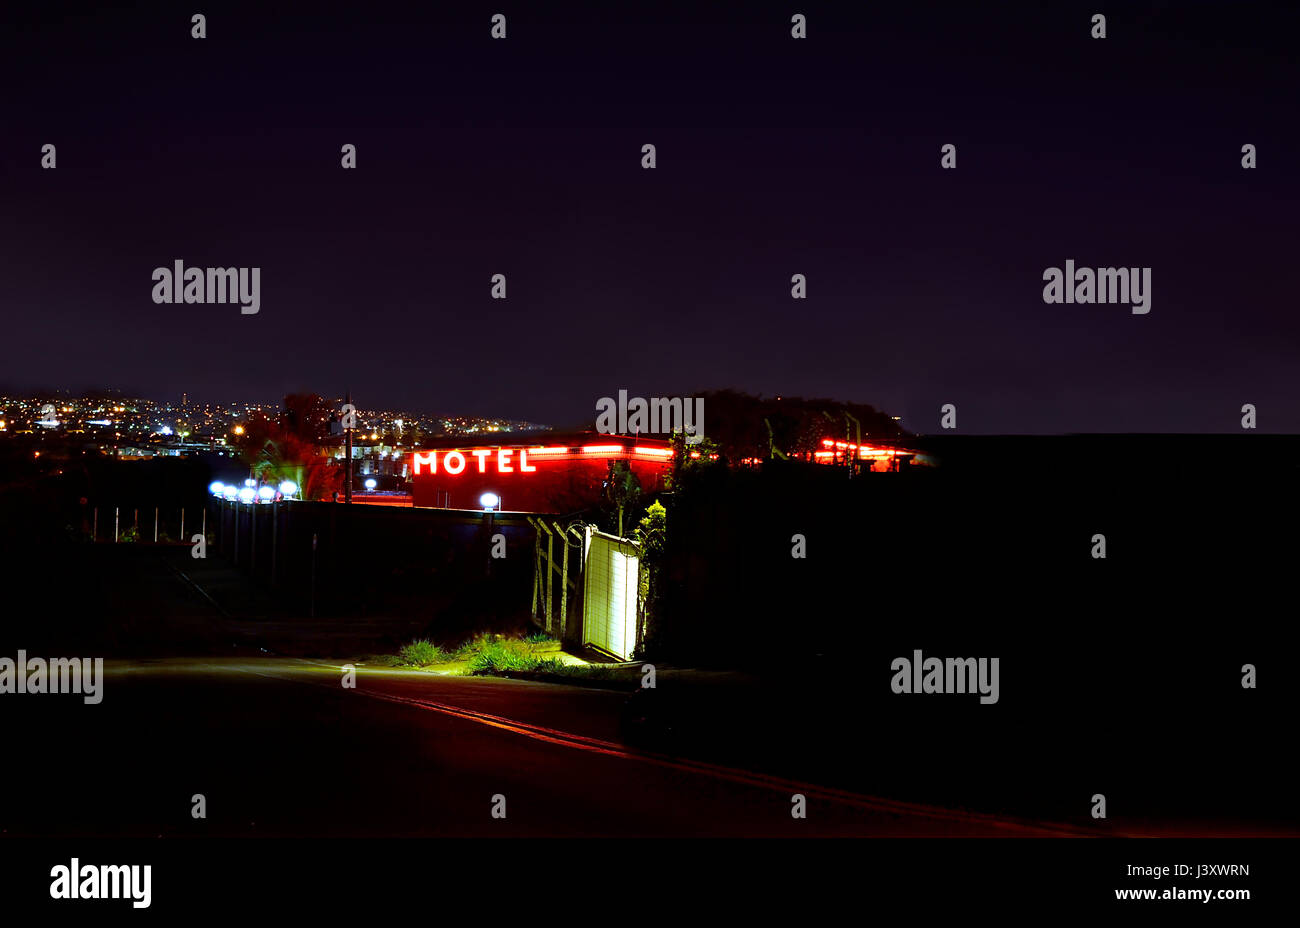 Motel by a secondary dark road with the illuminated red sign on Stock Photo